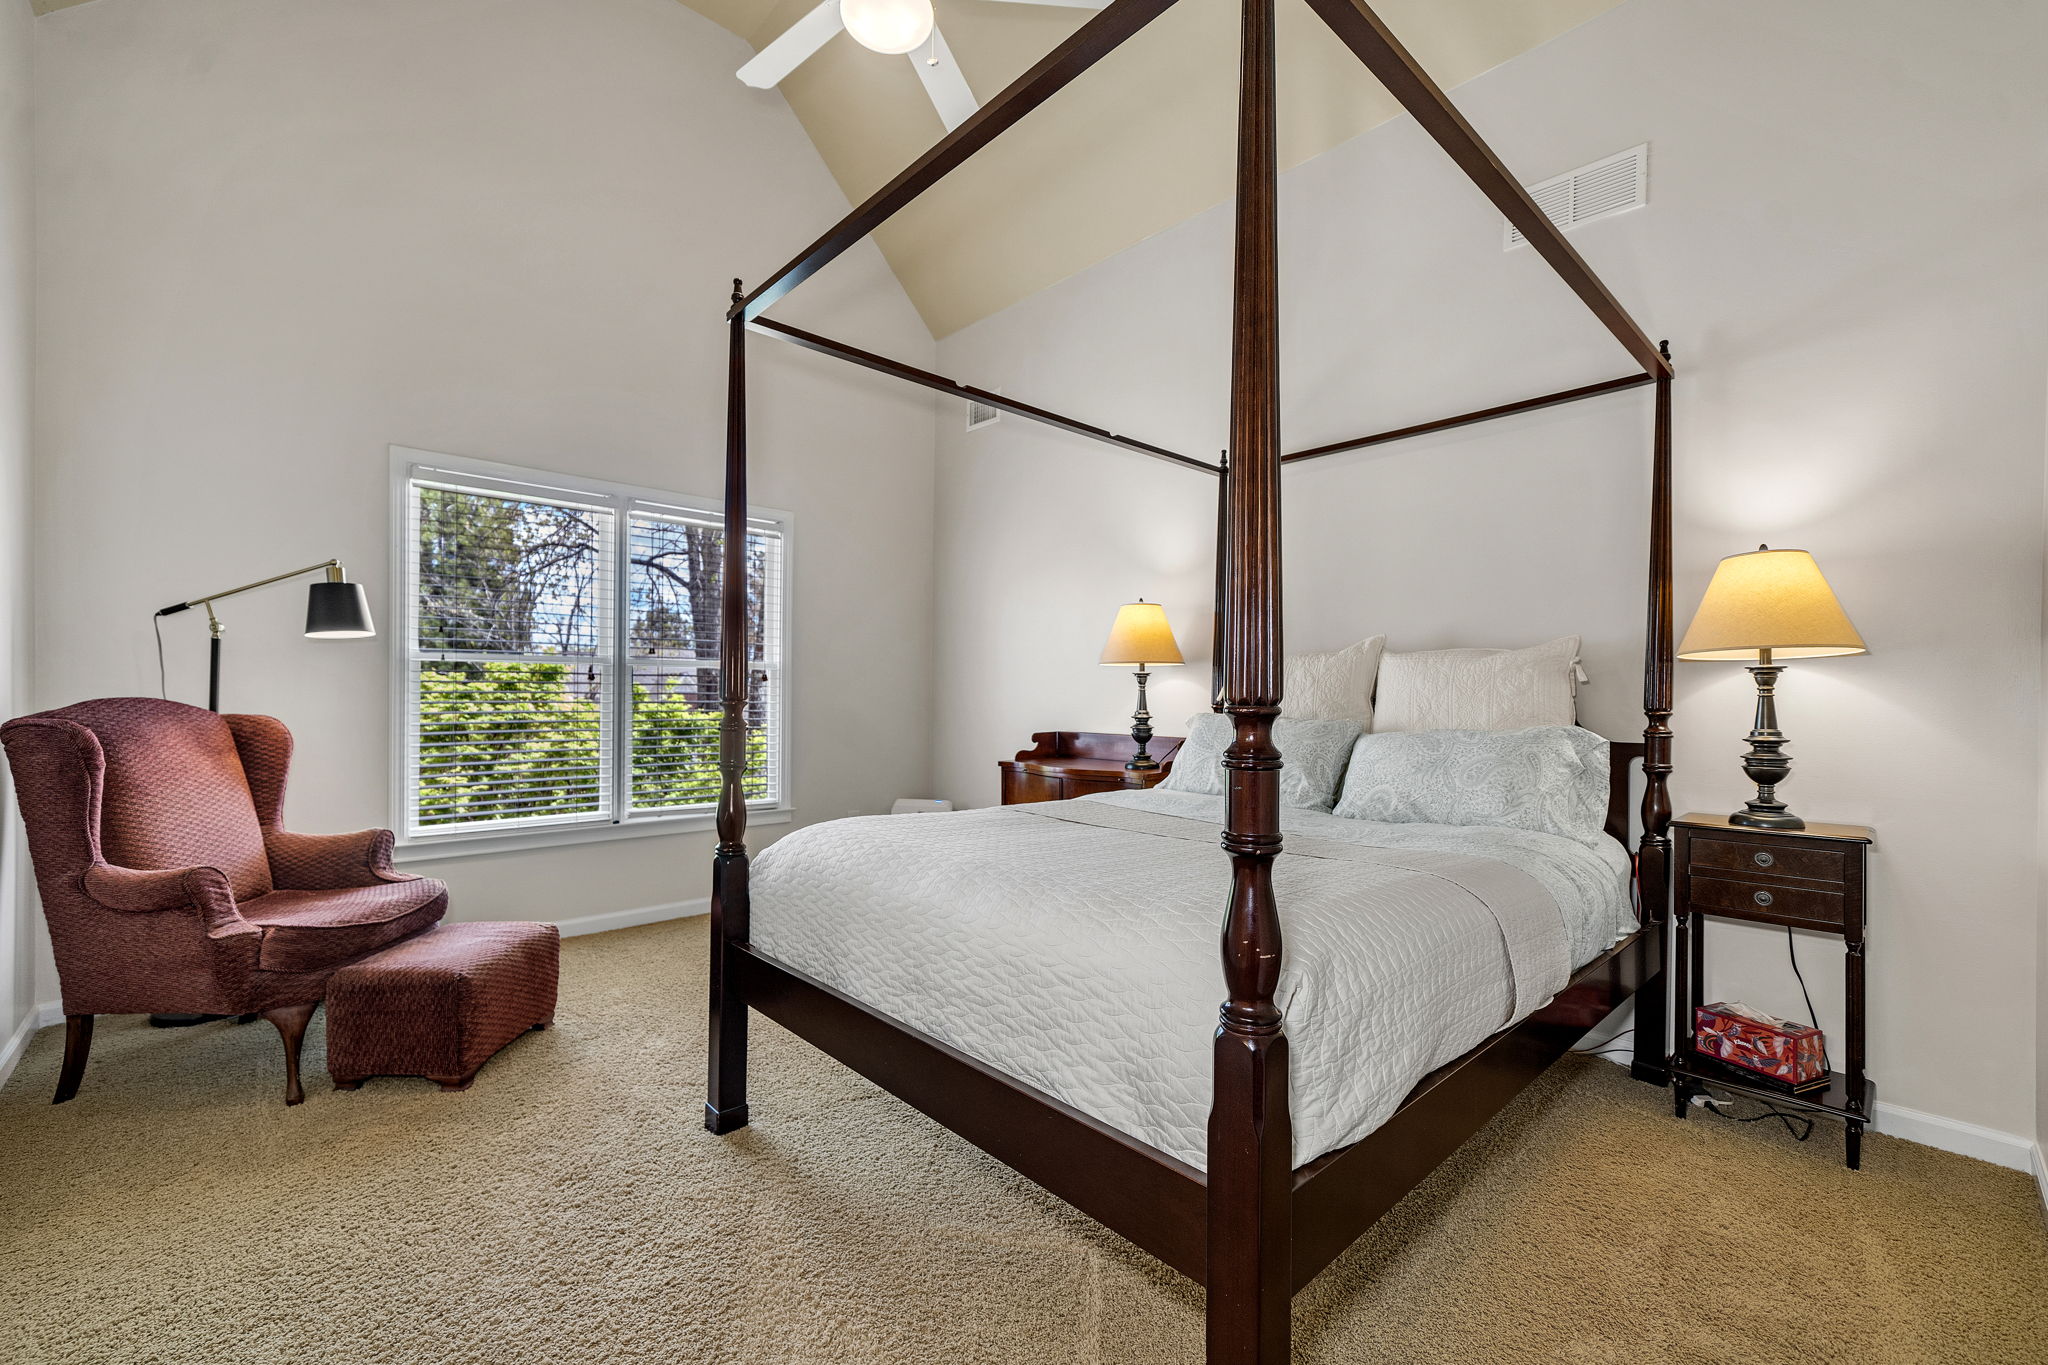 Wonderful guest bedroom with it's cathedral ceiling and sunrise views!